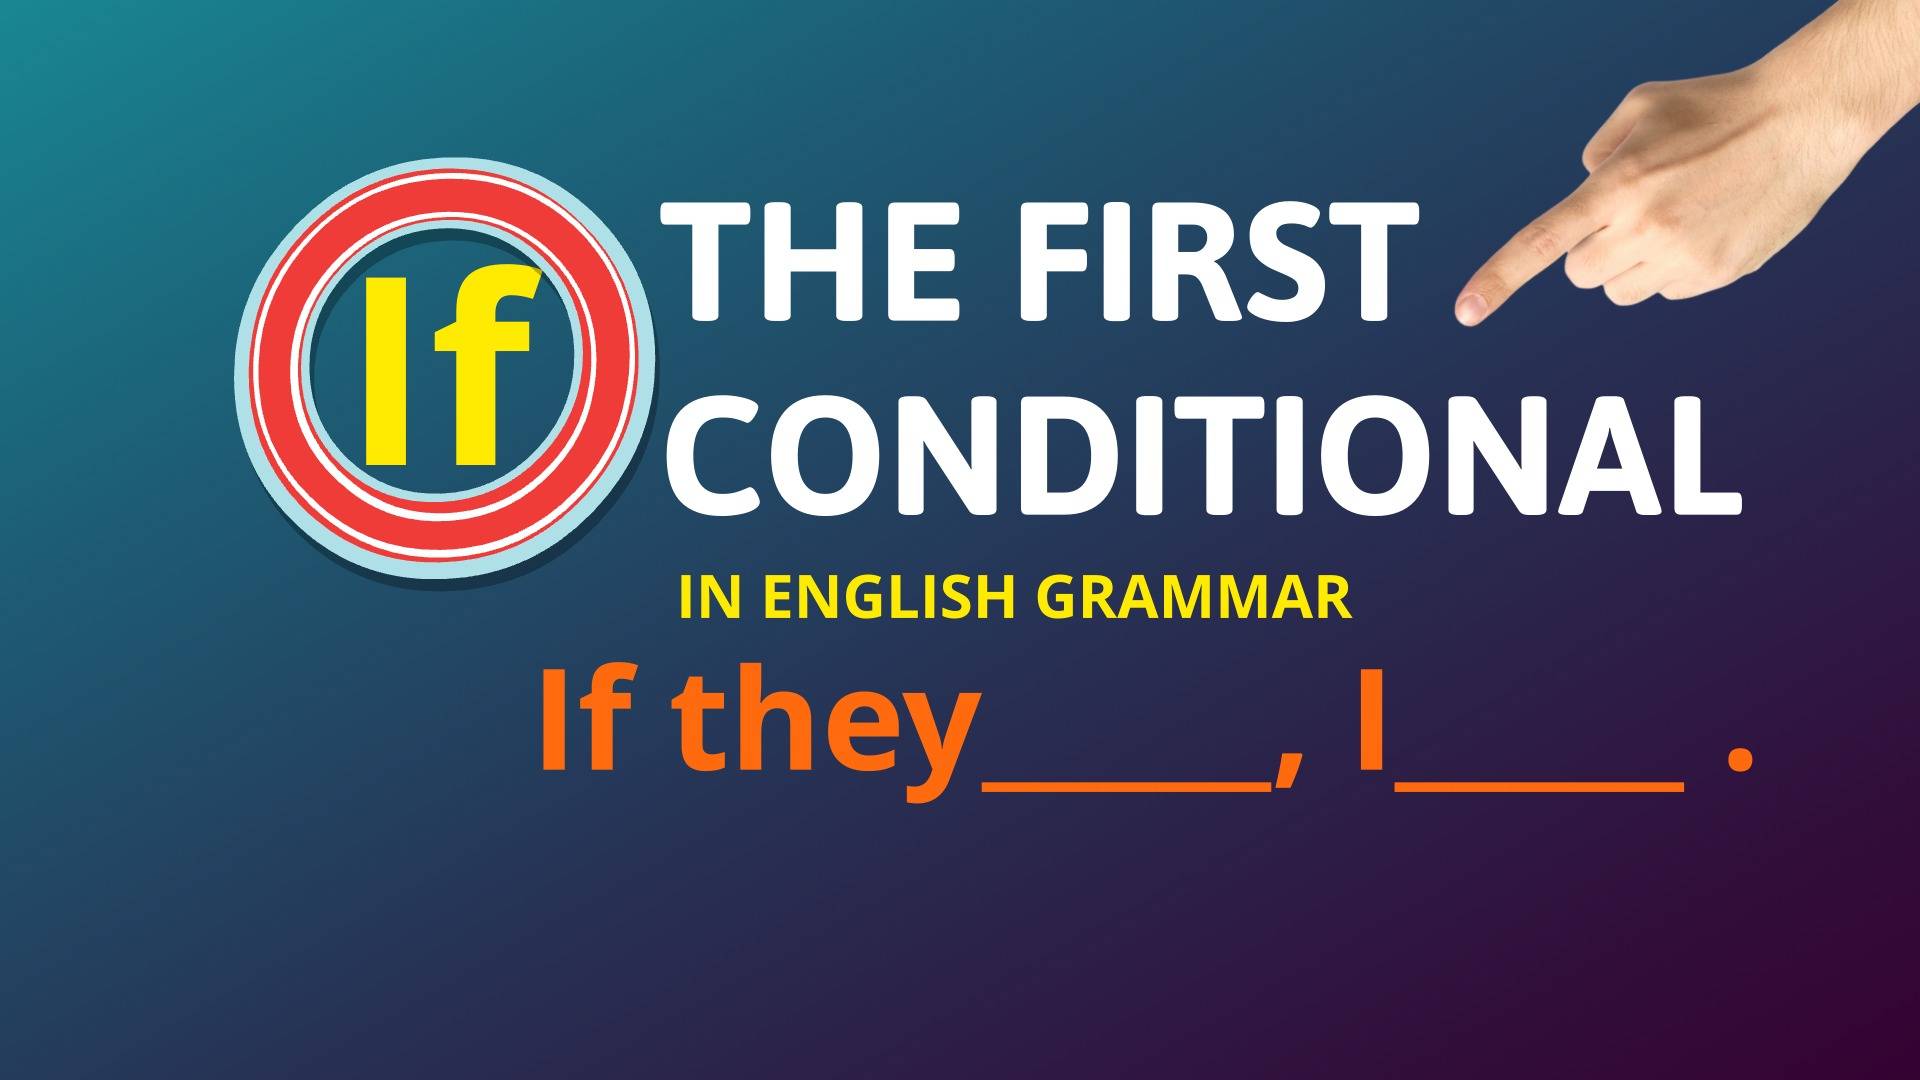 The first conditional